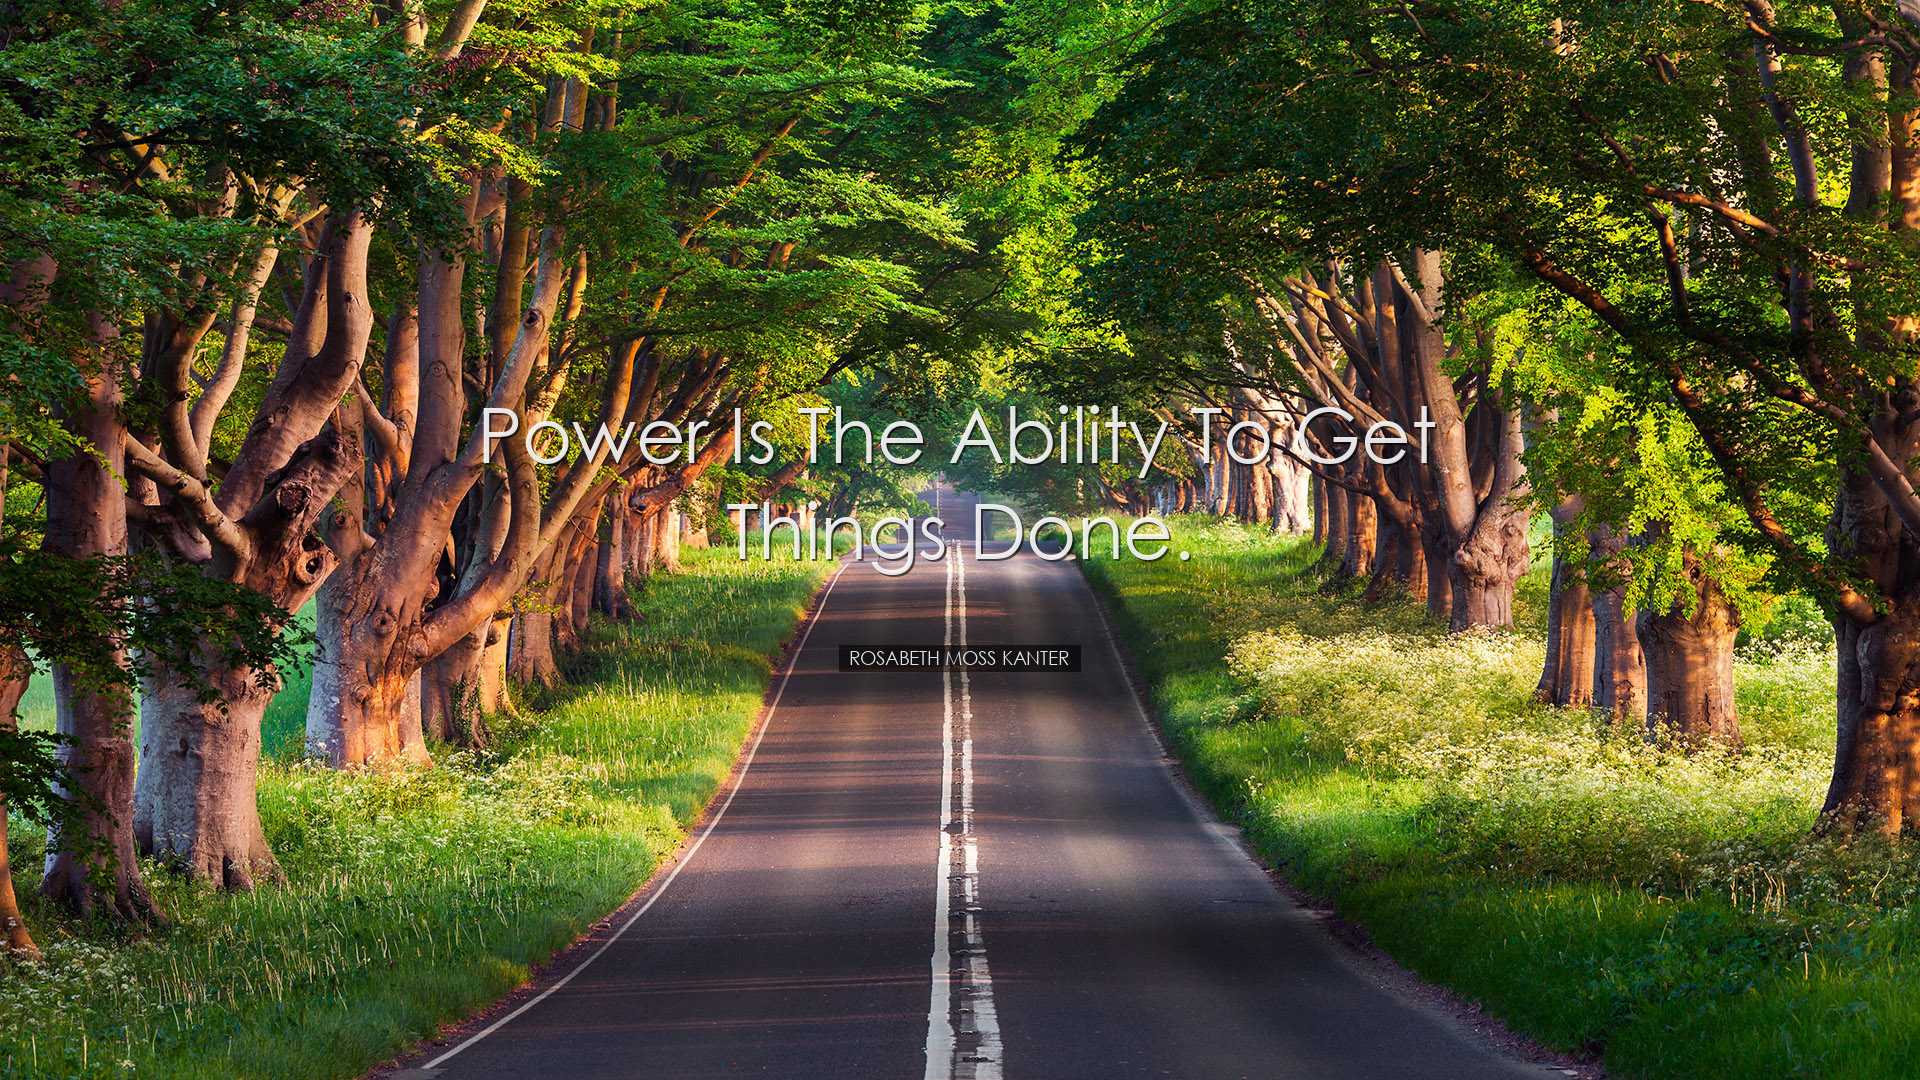 Power is the ability to get things done. - Rosabeth Moss Kanter